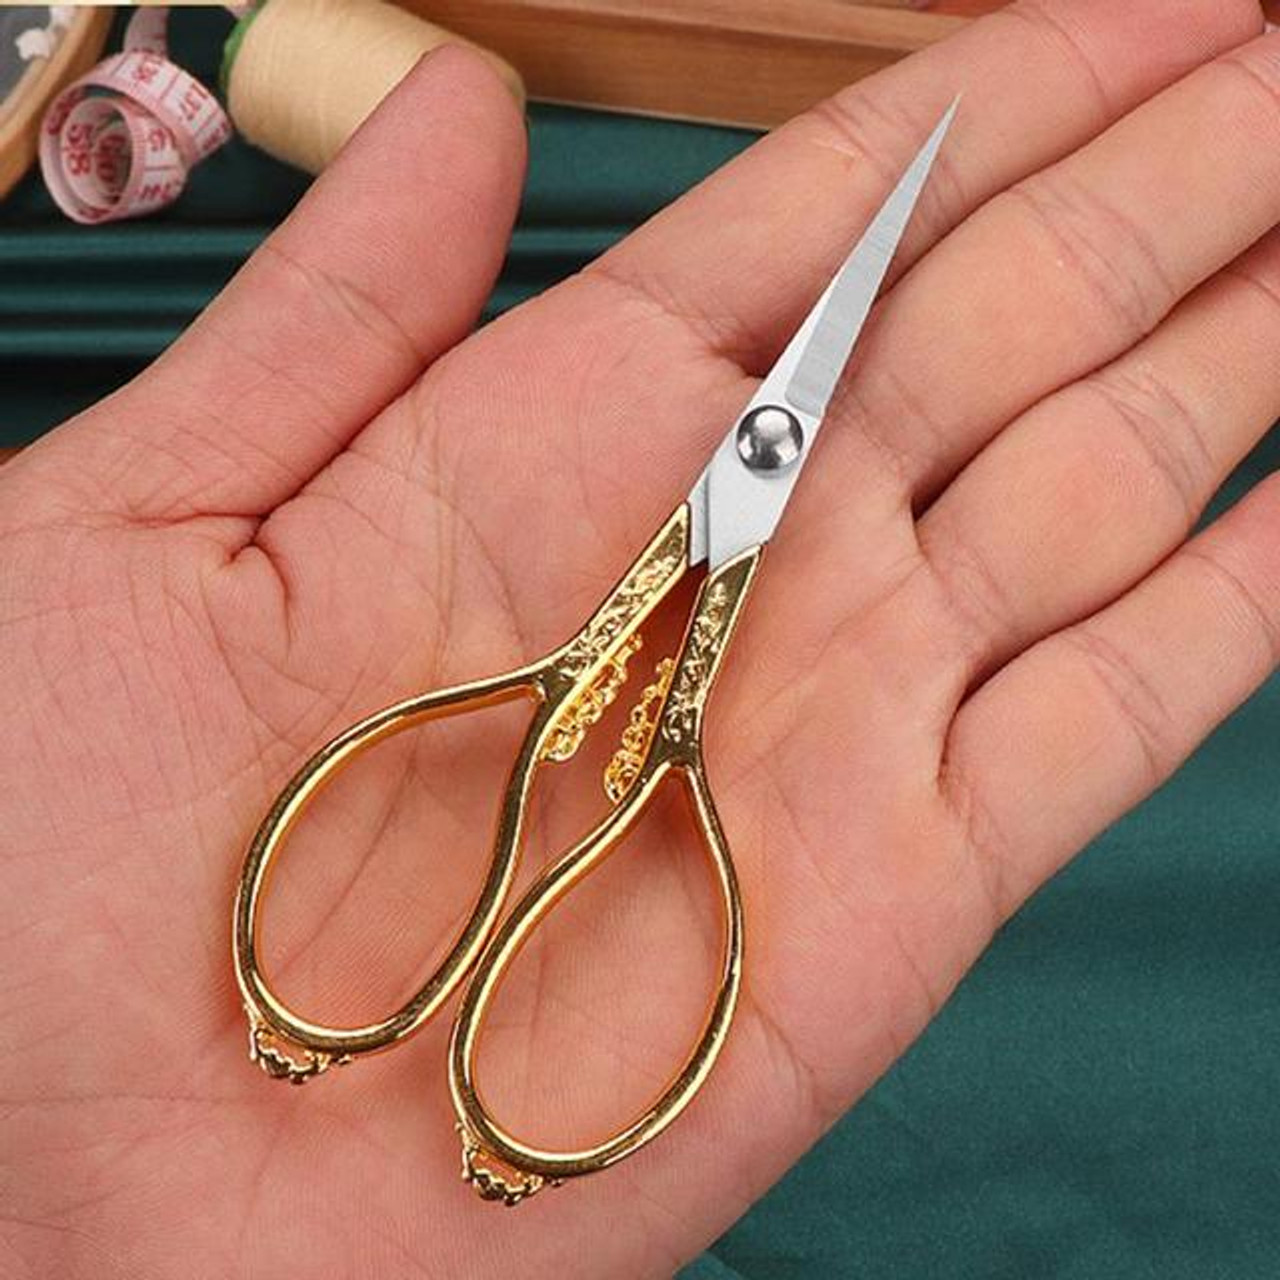 Kimberbell Deluxe Embroidery Scissors & Tools - Set Of 4, Made With Finest  Steel, Includes: 5” Duckbill Appliqué, Precision Fine Tip Tweezers With